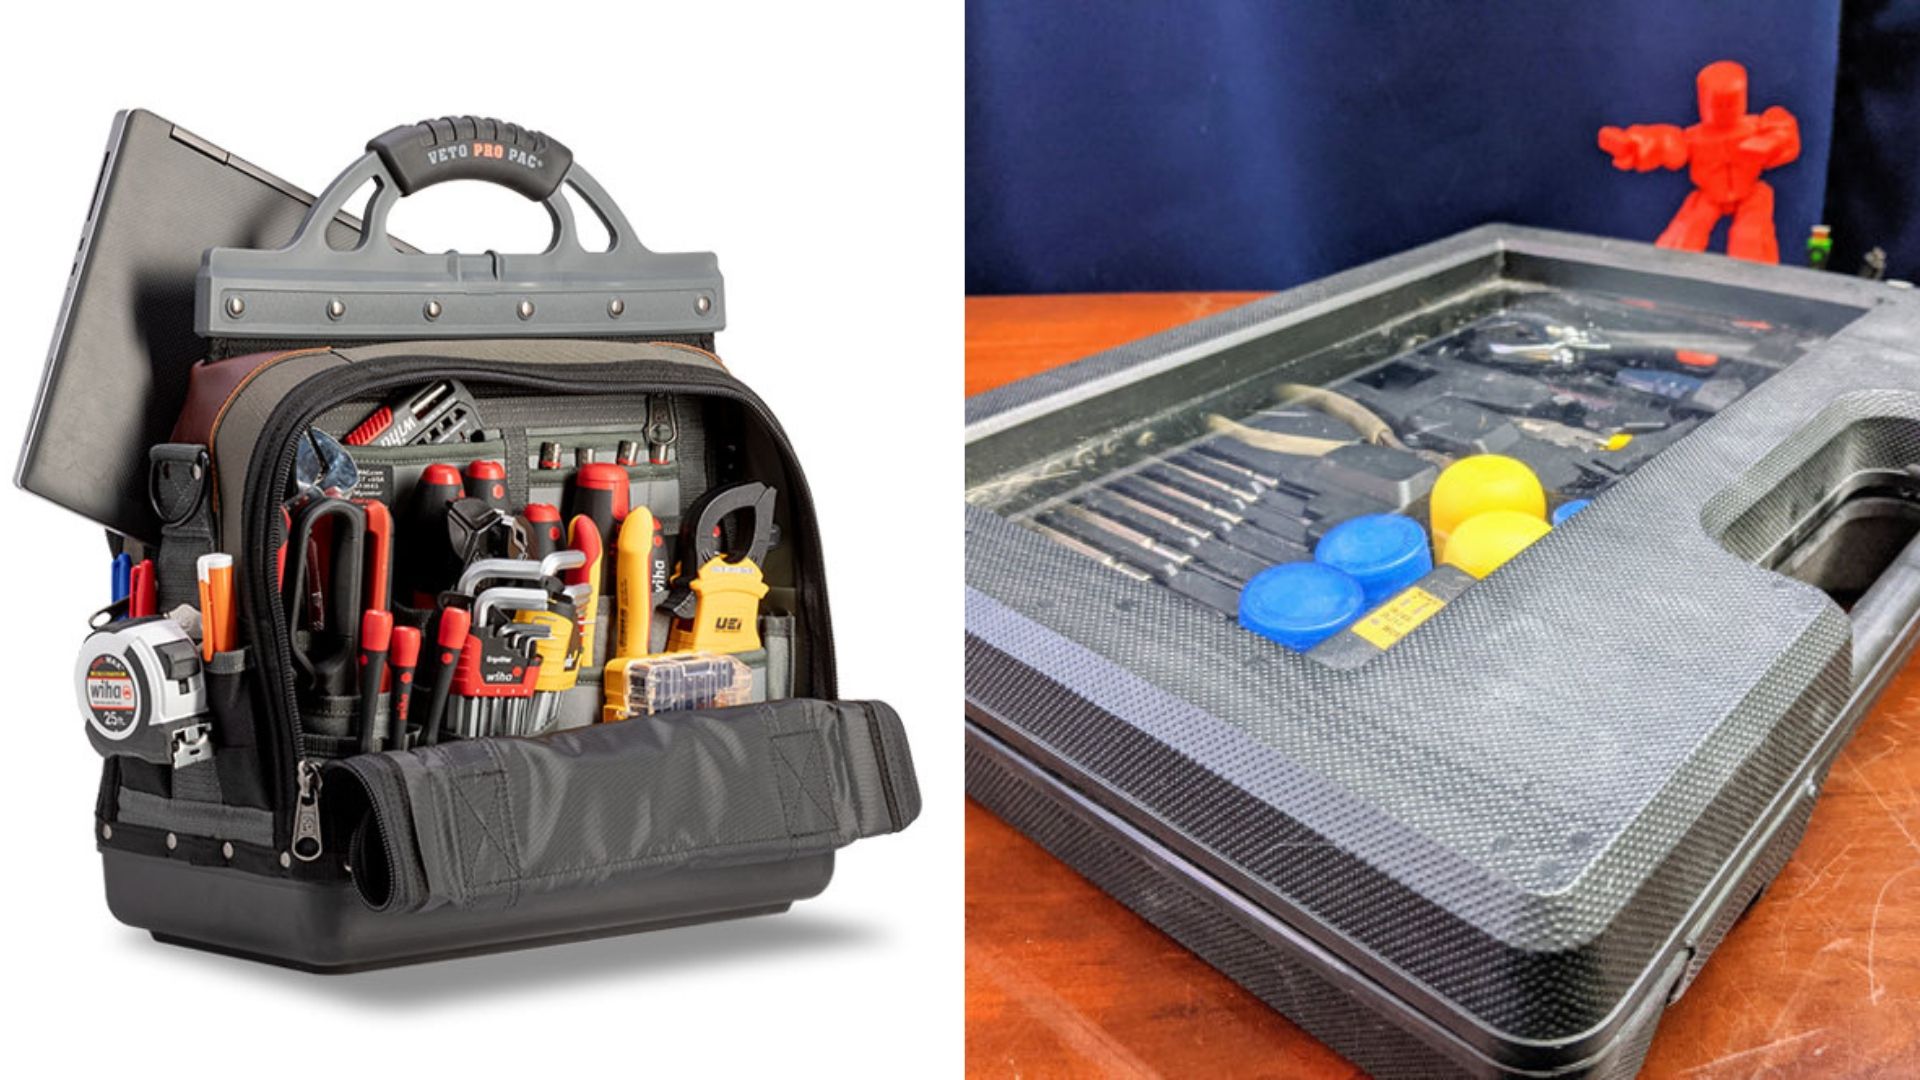 2 different types of tool kits.